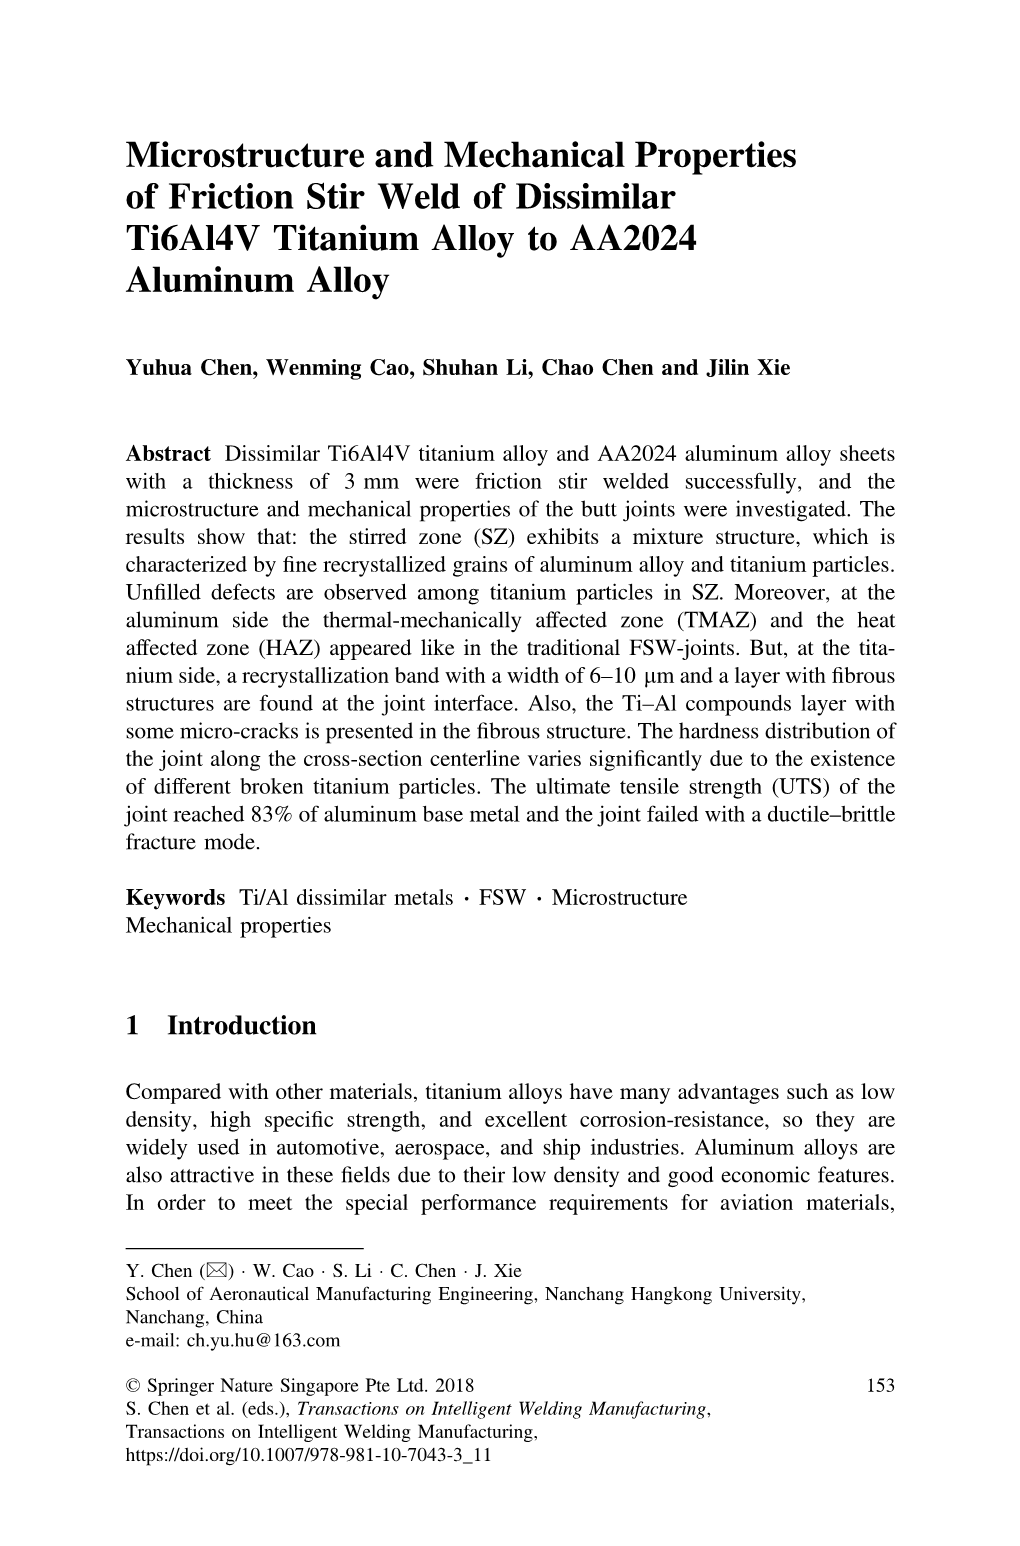 Microstructure and Mechanical Properties of Friction Stir Weld of Dissimilar Ti6al4v Titanium Alloy to AA2024 Aluminum Alloy